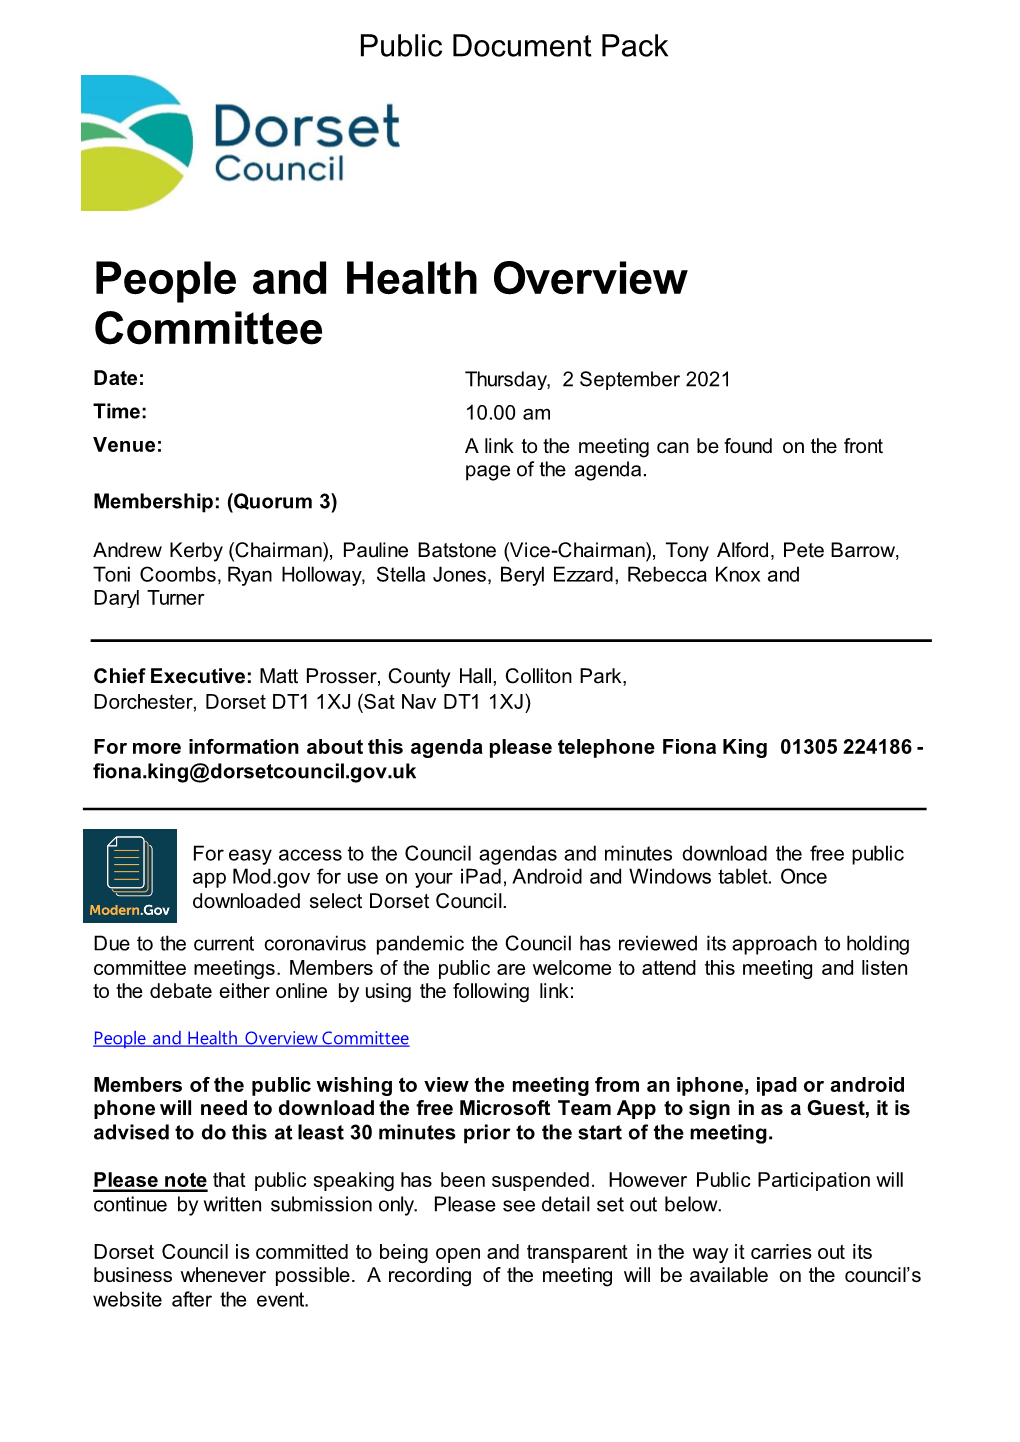 People and Health Overview Committee Date: Thursday, 2 September 2021 Time: 10.00 Am Venue: a Link to the Meeting Can Be Found on the Front Page of the Agenda